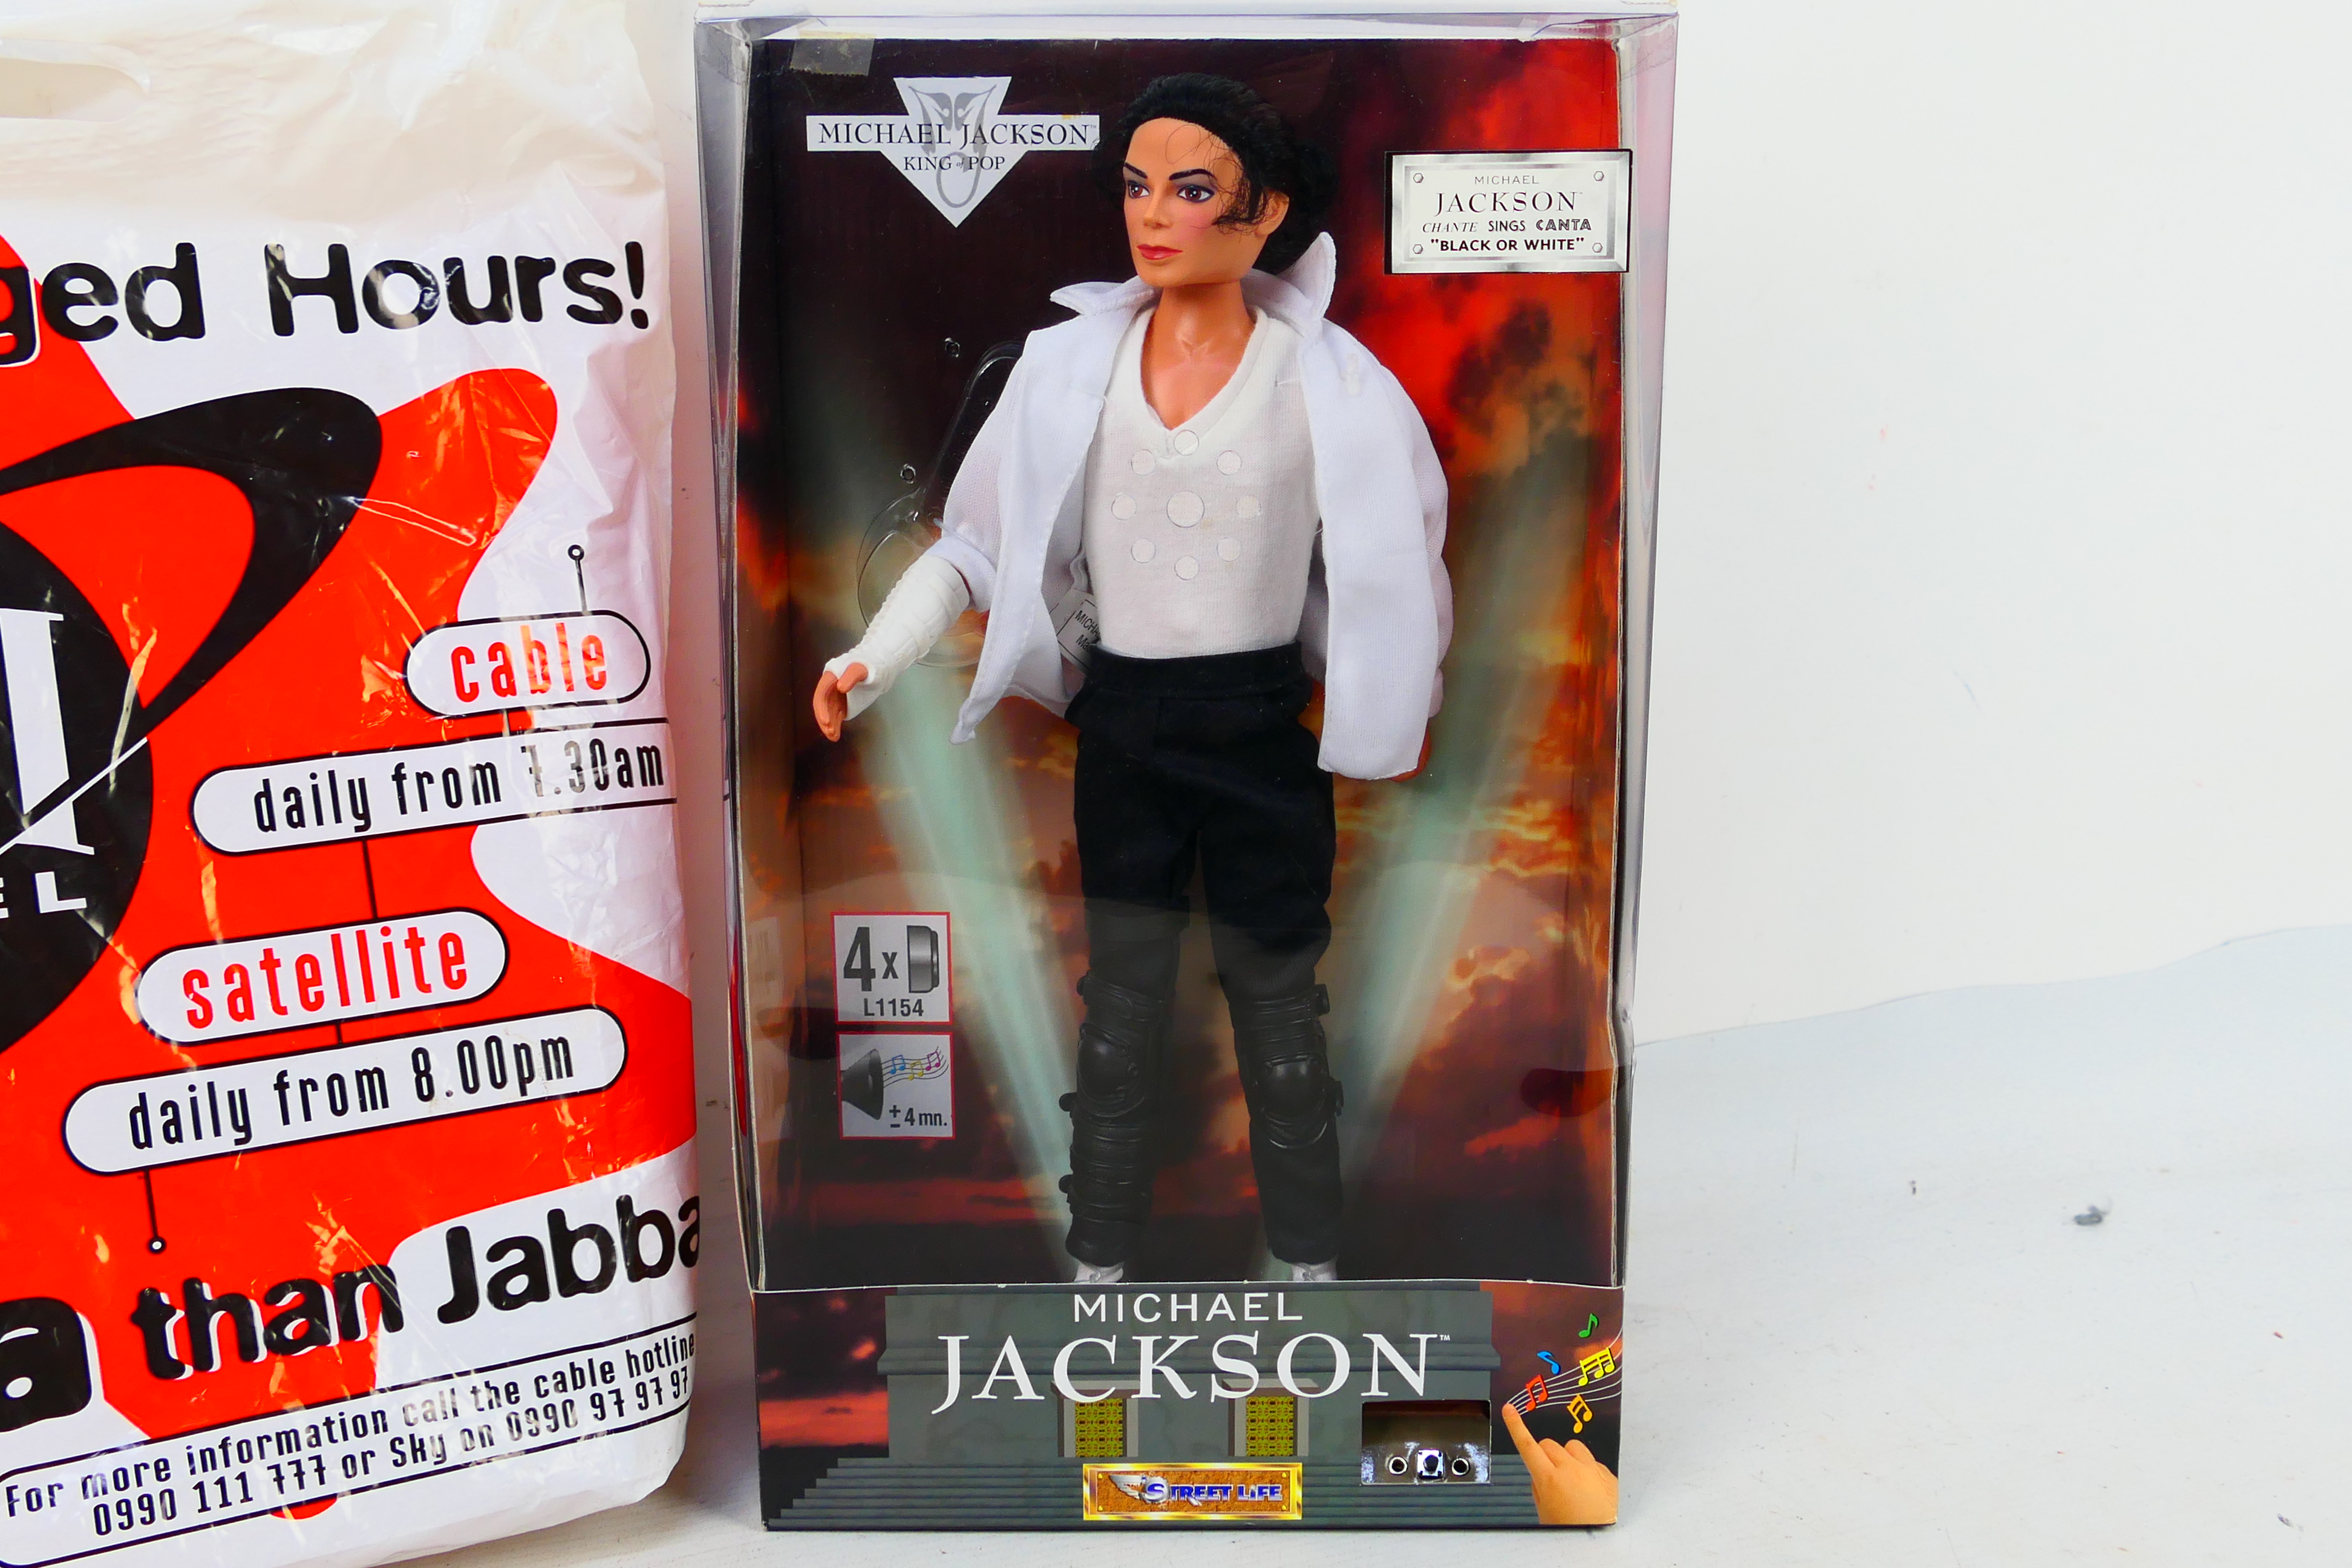 Michael Jackson - Street Life. A King of Pop, Michael Jackson 12" action figure by Street Life. - Image 2 of 3